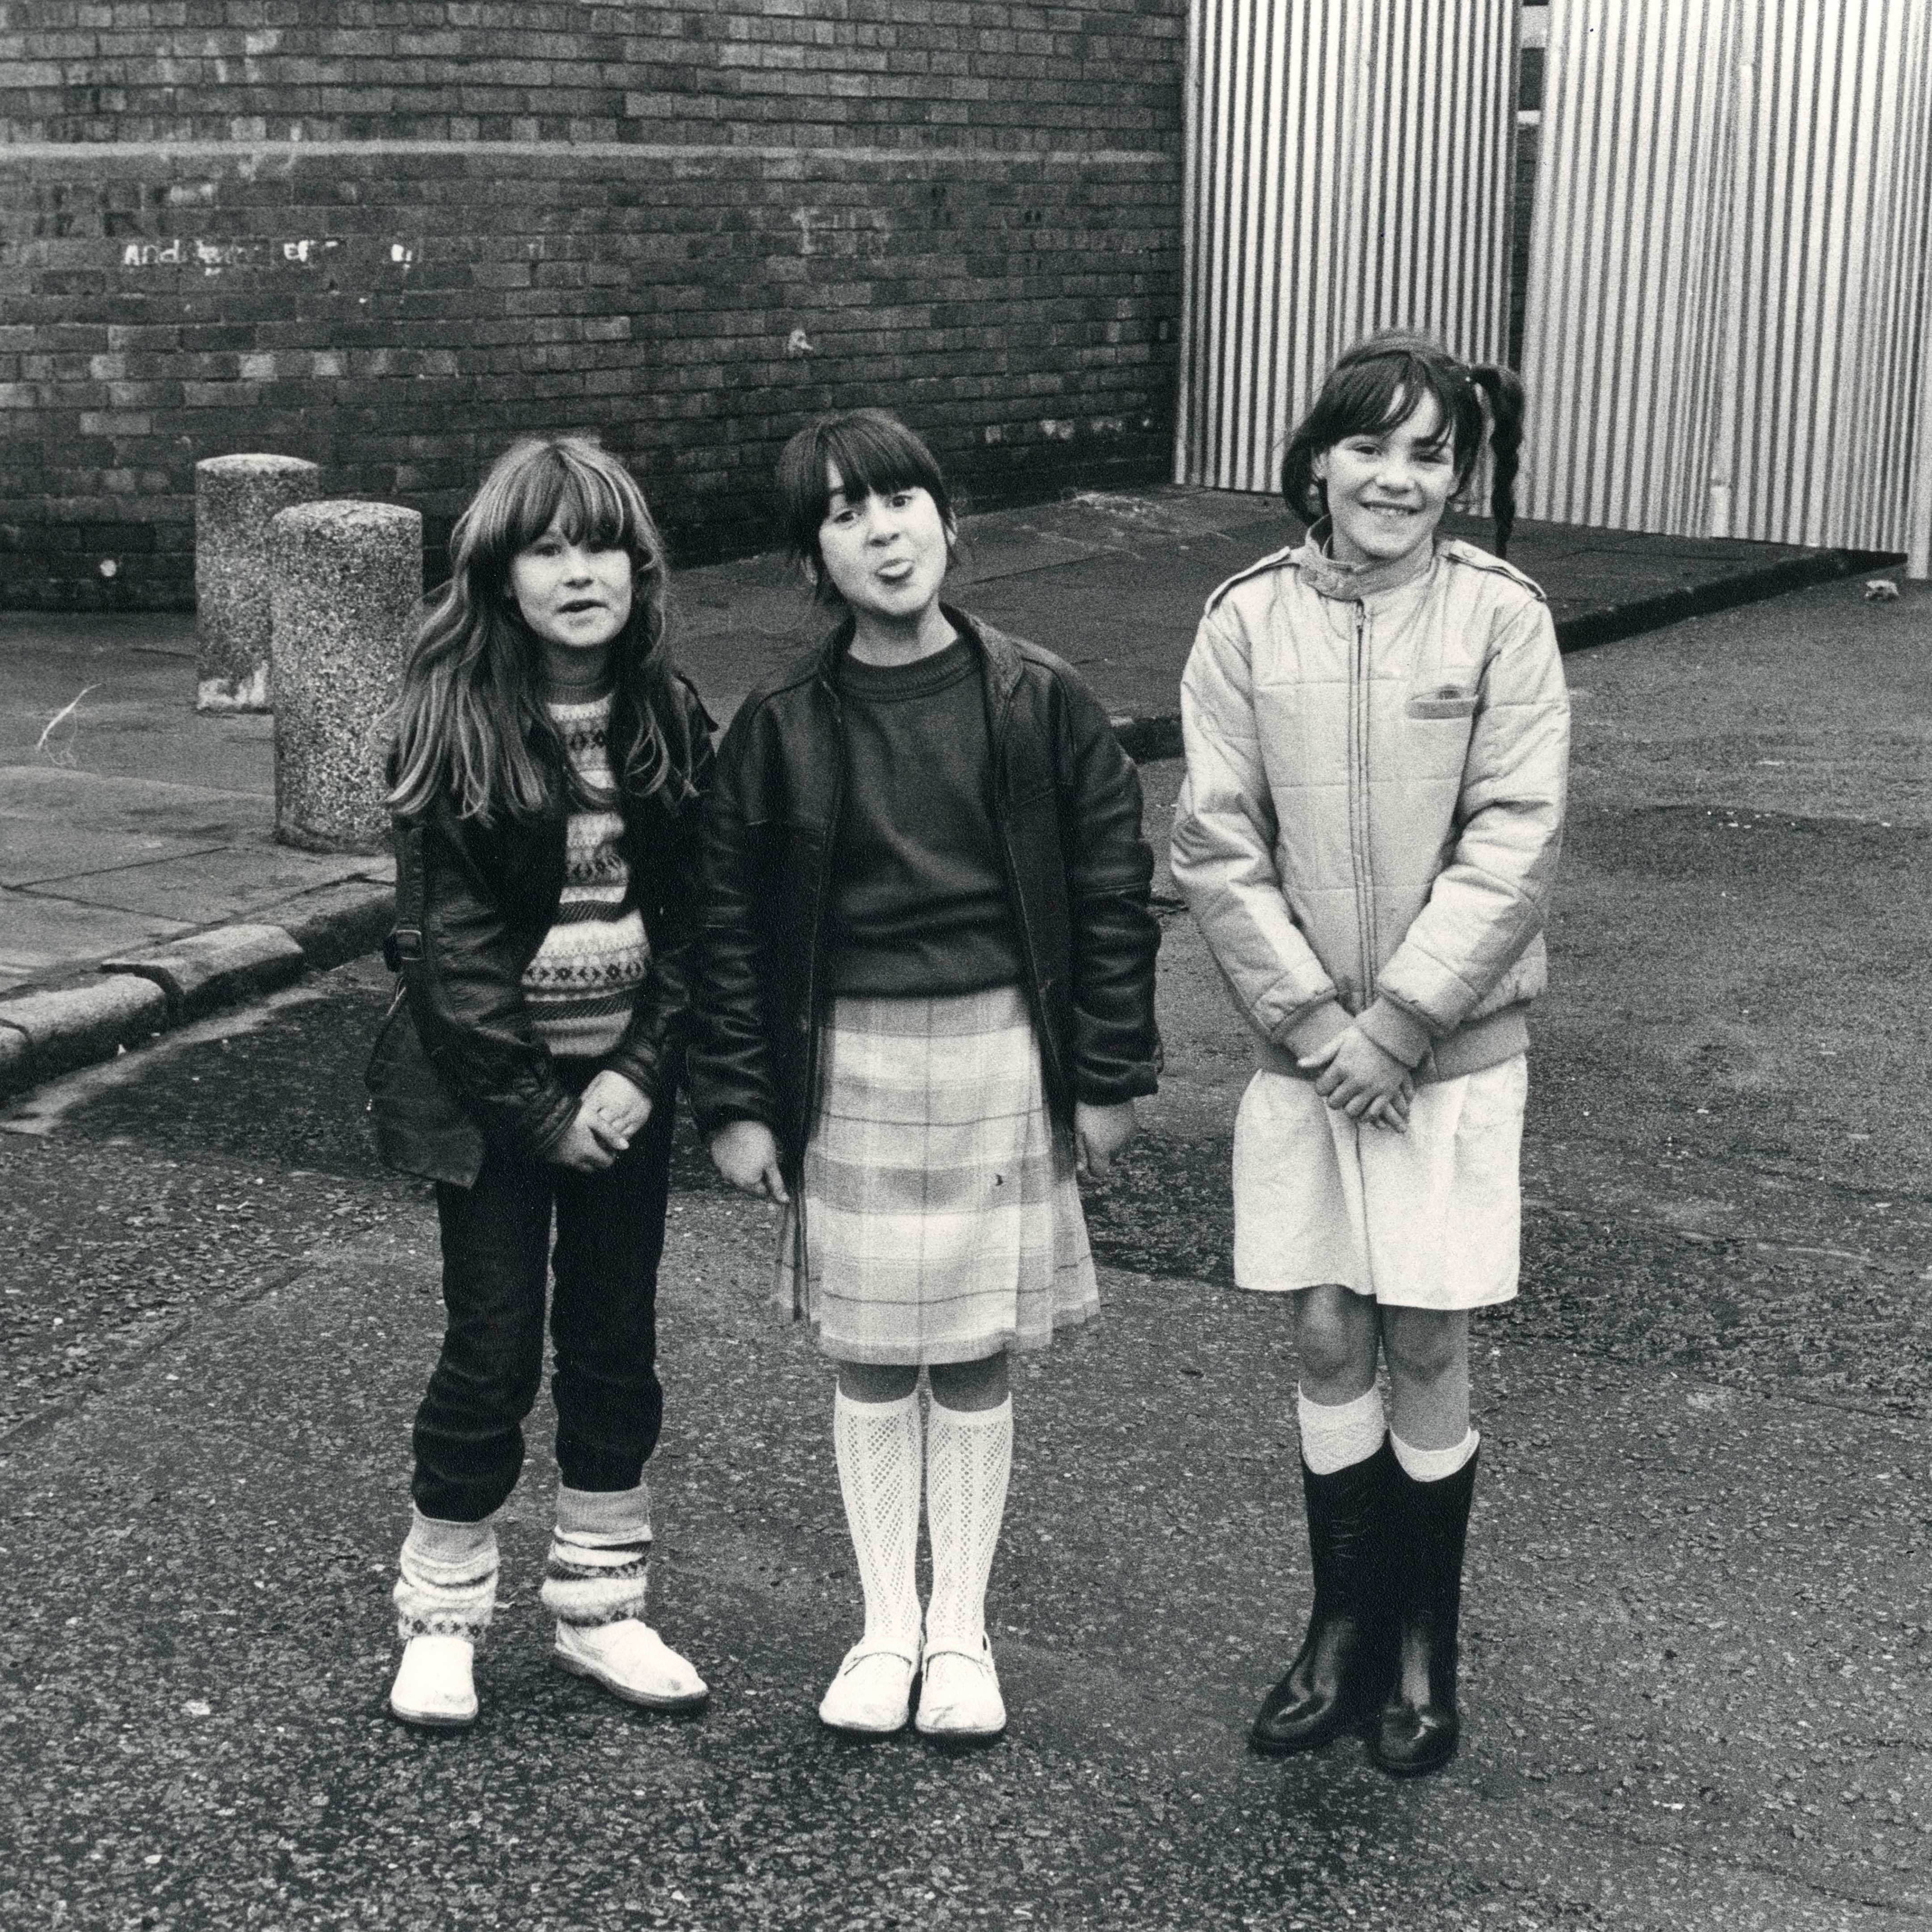 British Kids in The 1980s - Brilliant Photographs of Carefree Days